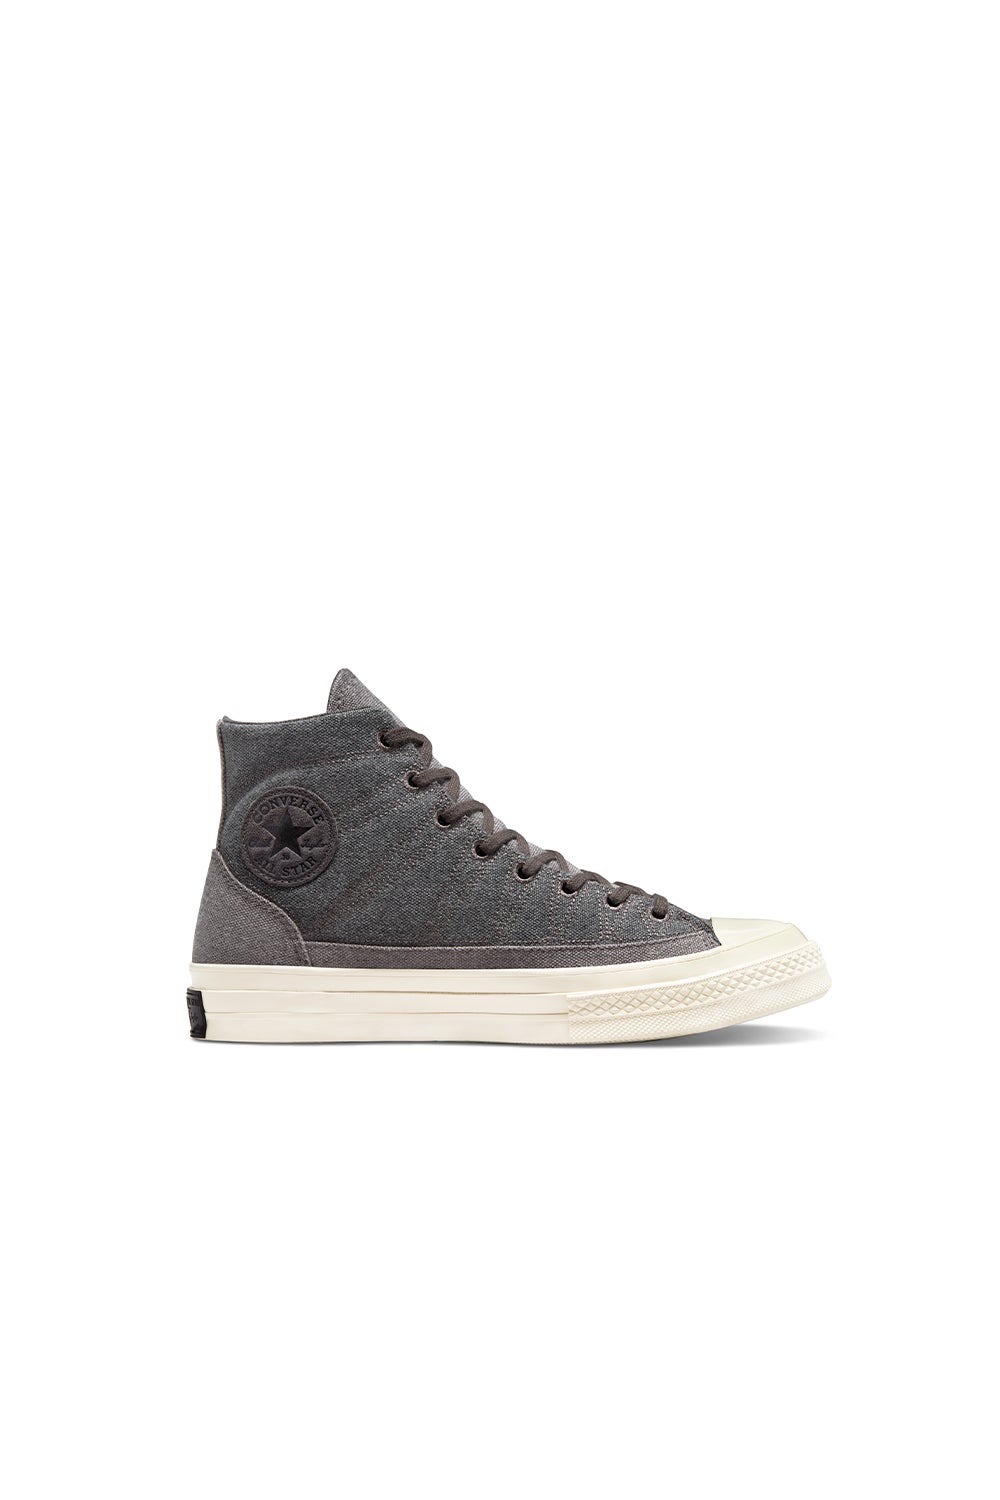 Converse Chuck 70 Hiking Stitched Canvas High Top Black